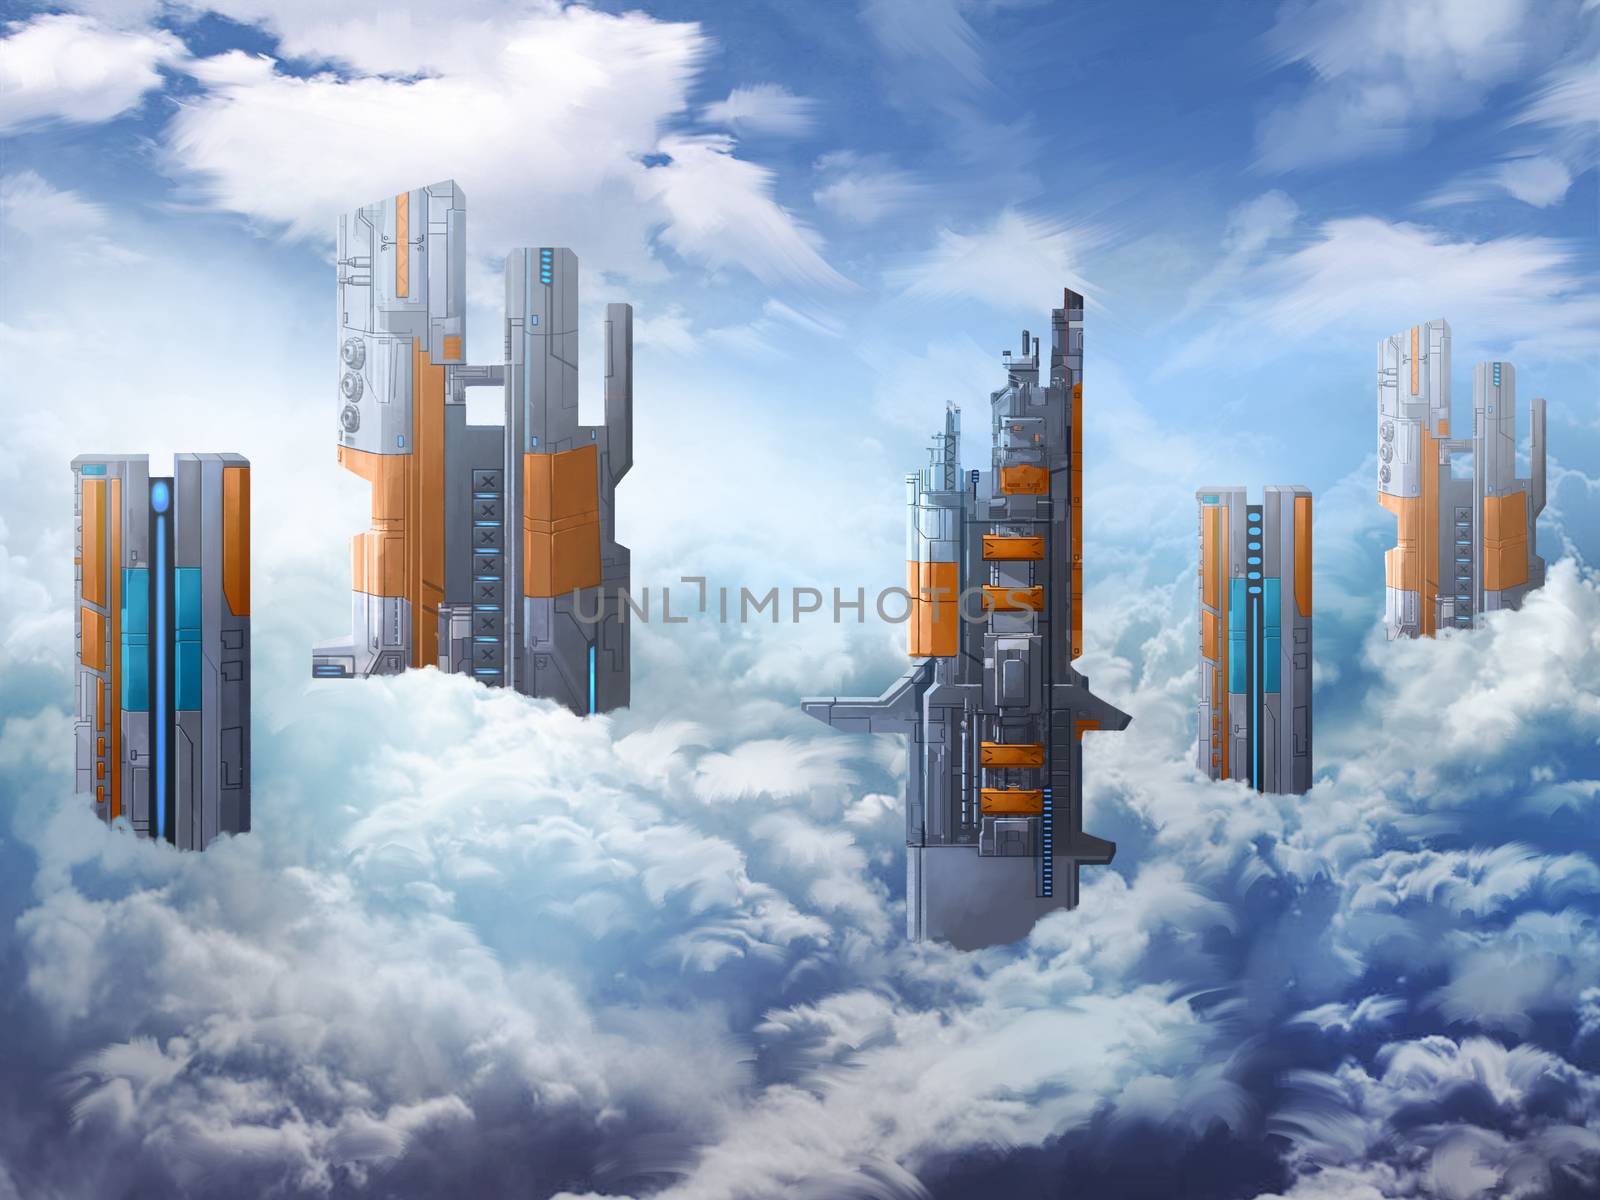 Illustration: The City in the Clouds. Realistic / Cartoon Style. Fantasy Topic. Scene / Wallpaper / Background Design.